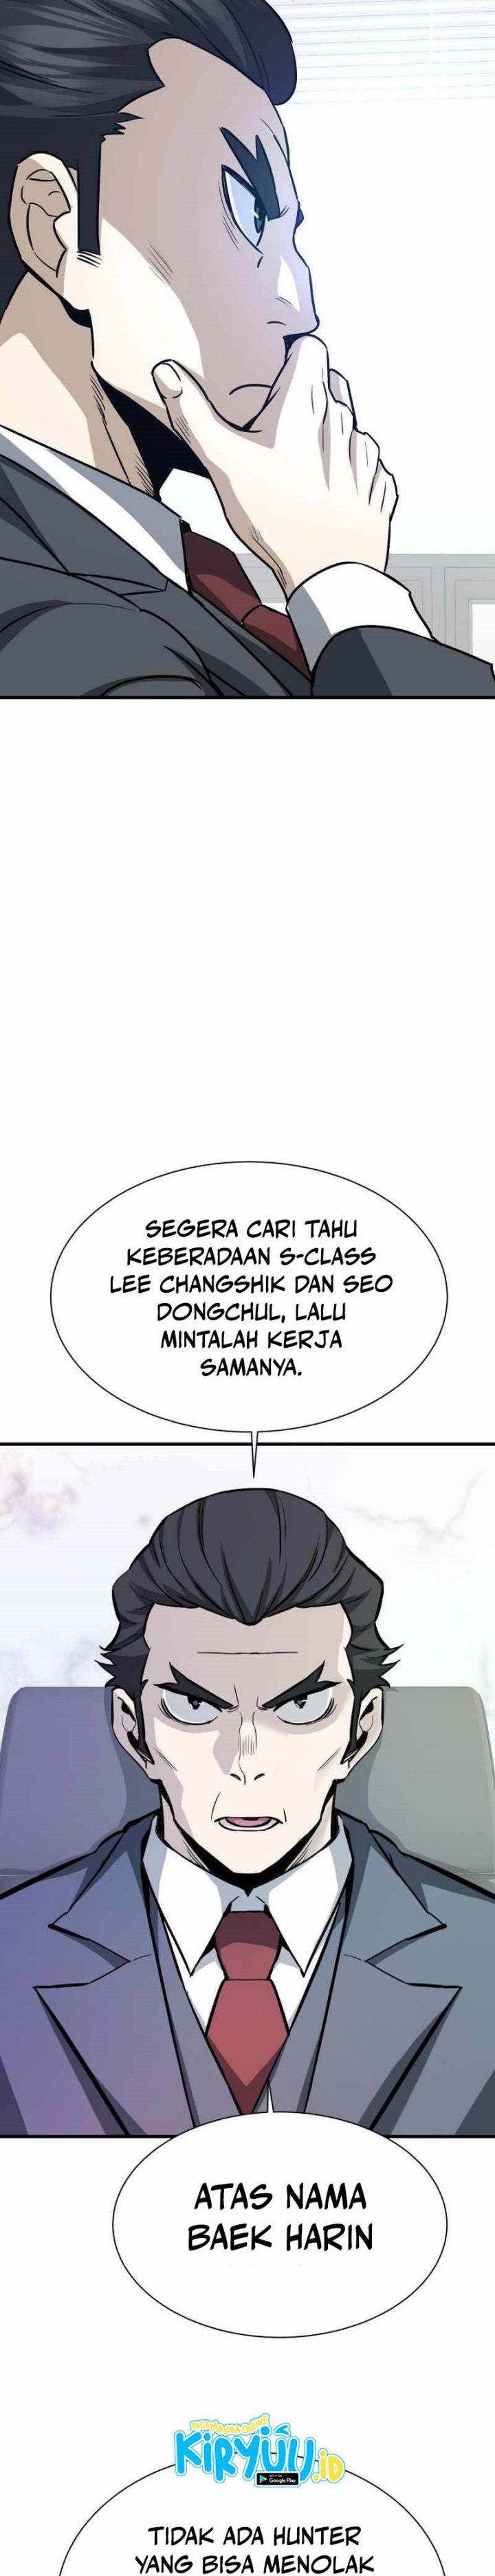 Han Dae Sung Returned From Hell Chapter 43 28